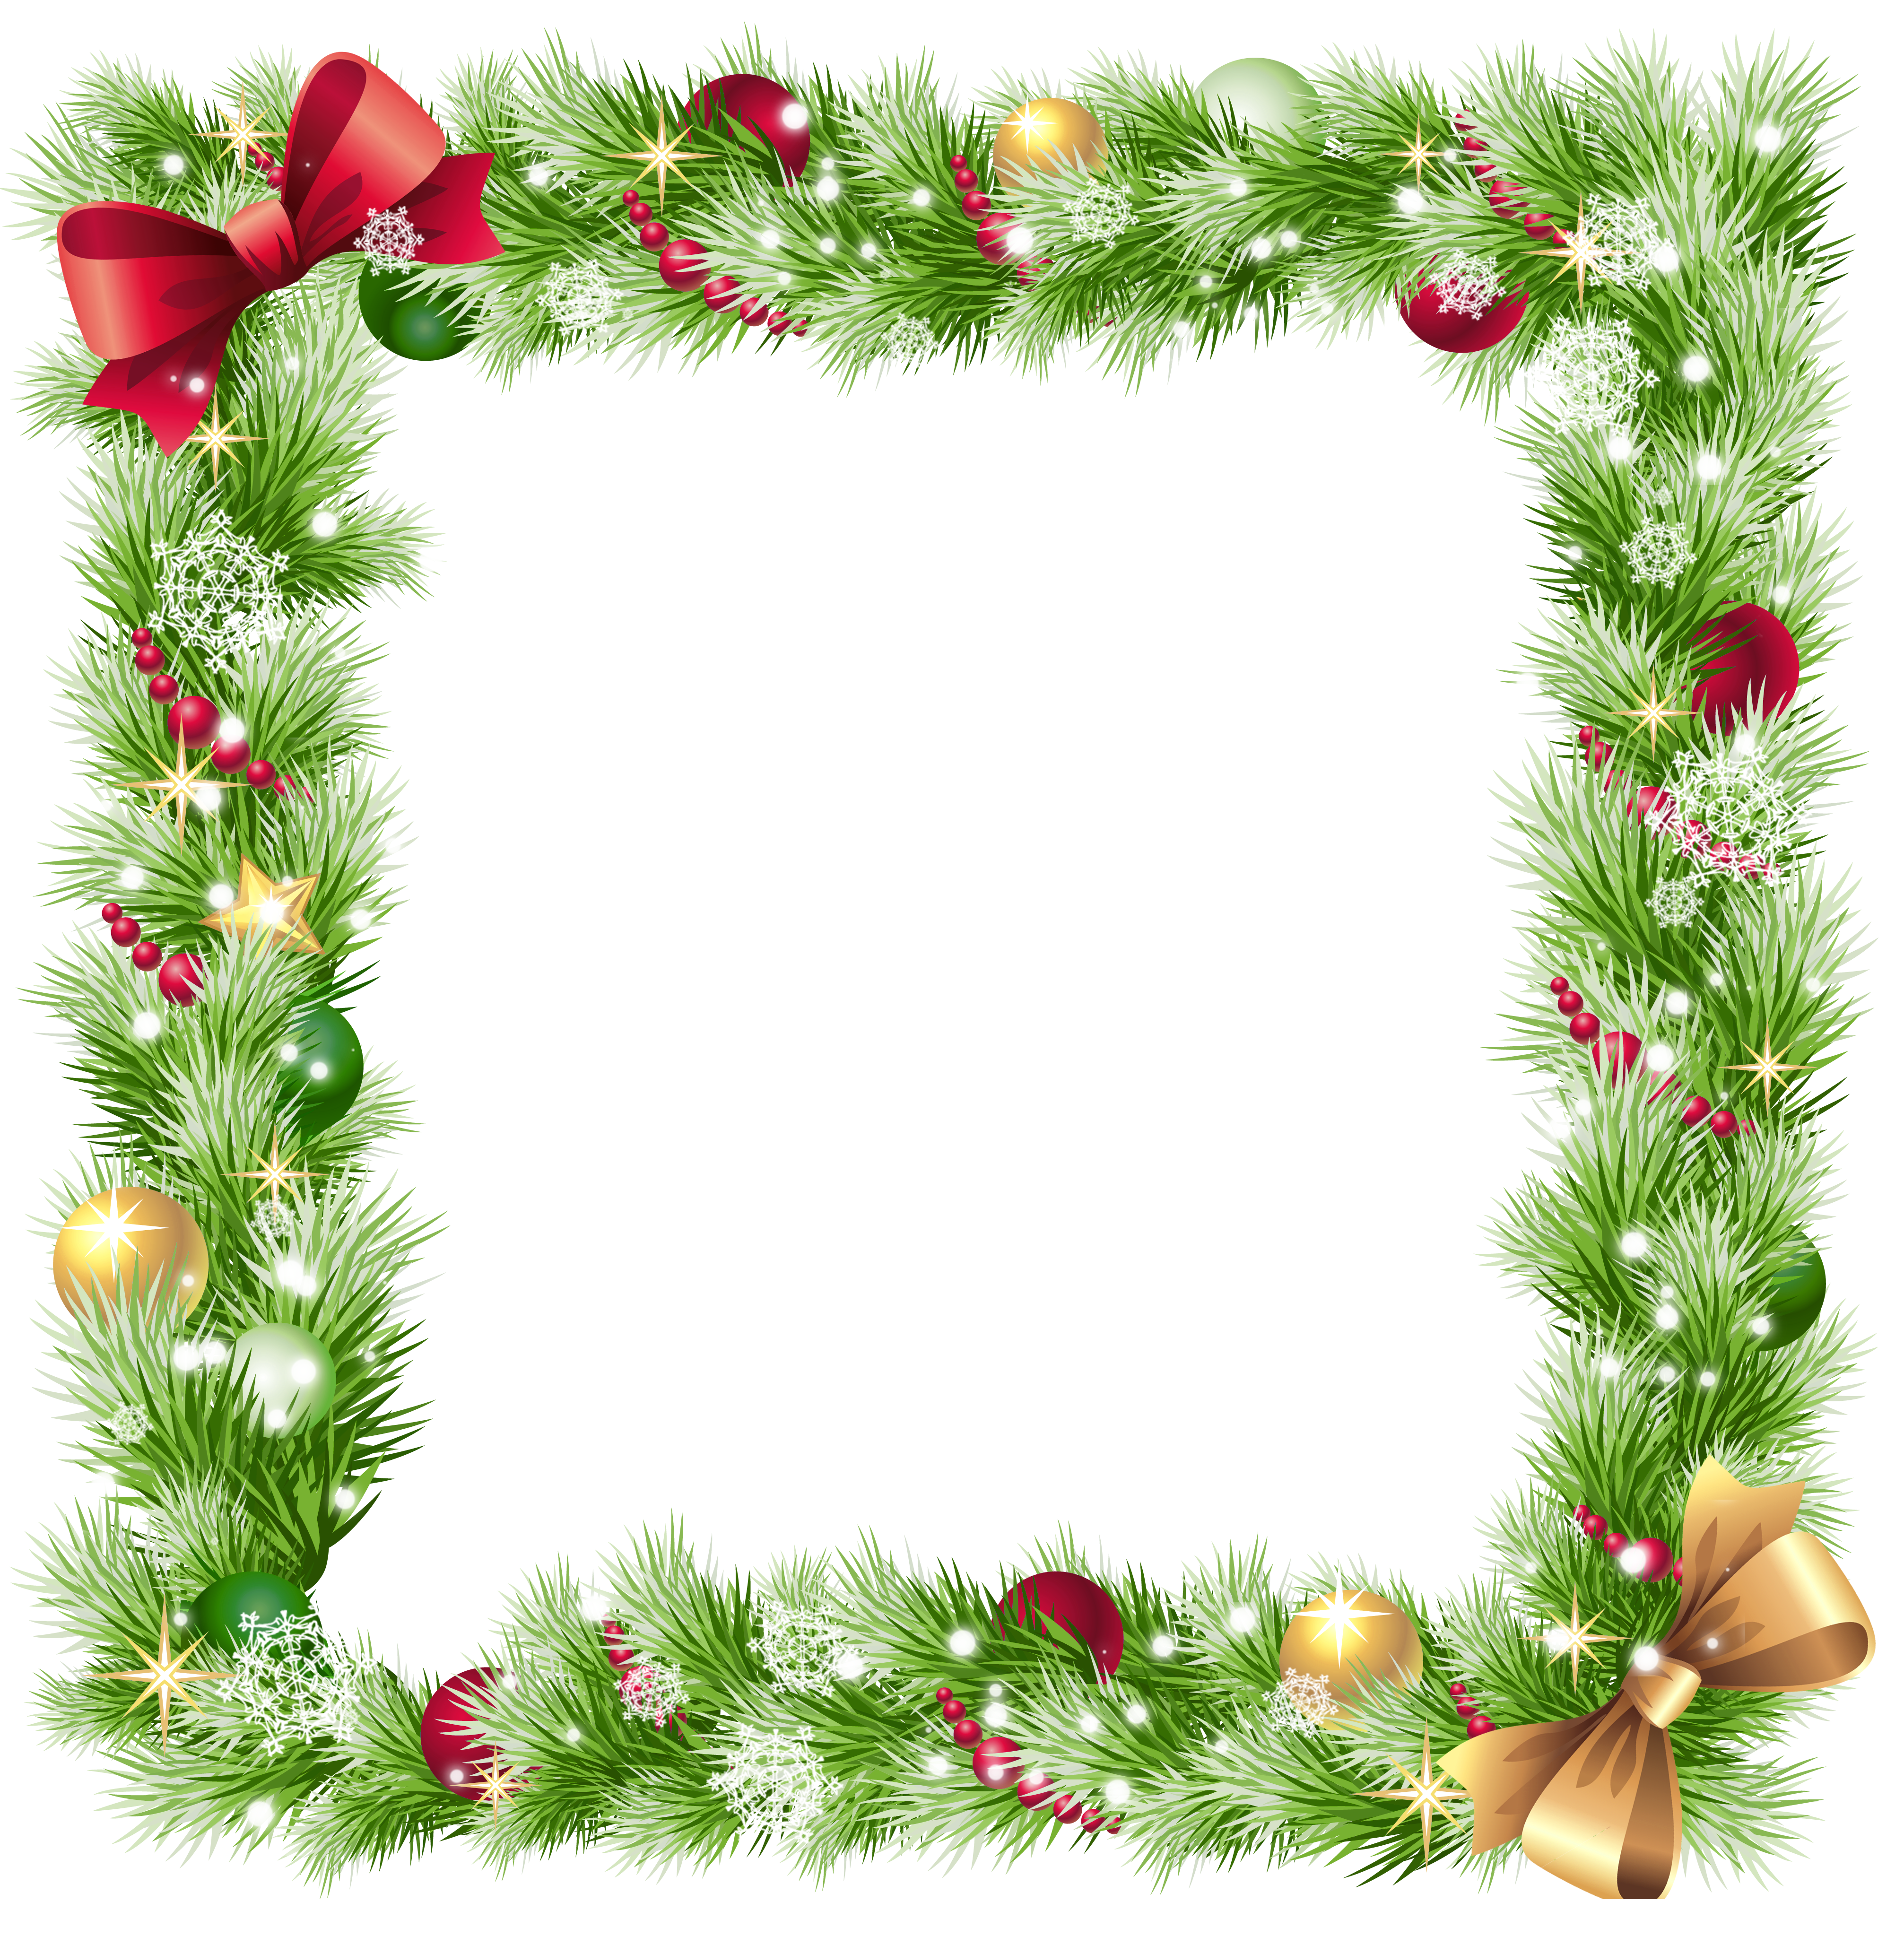 Christmas ornament border png. Frame with ornaments and